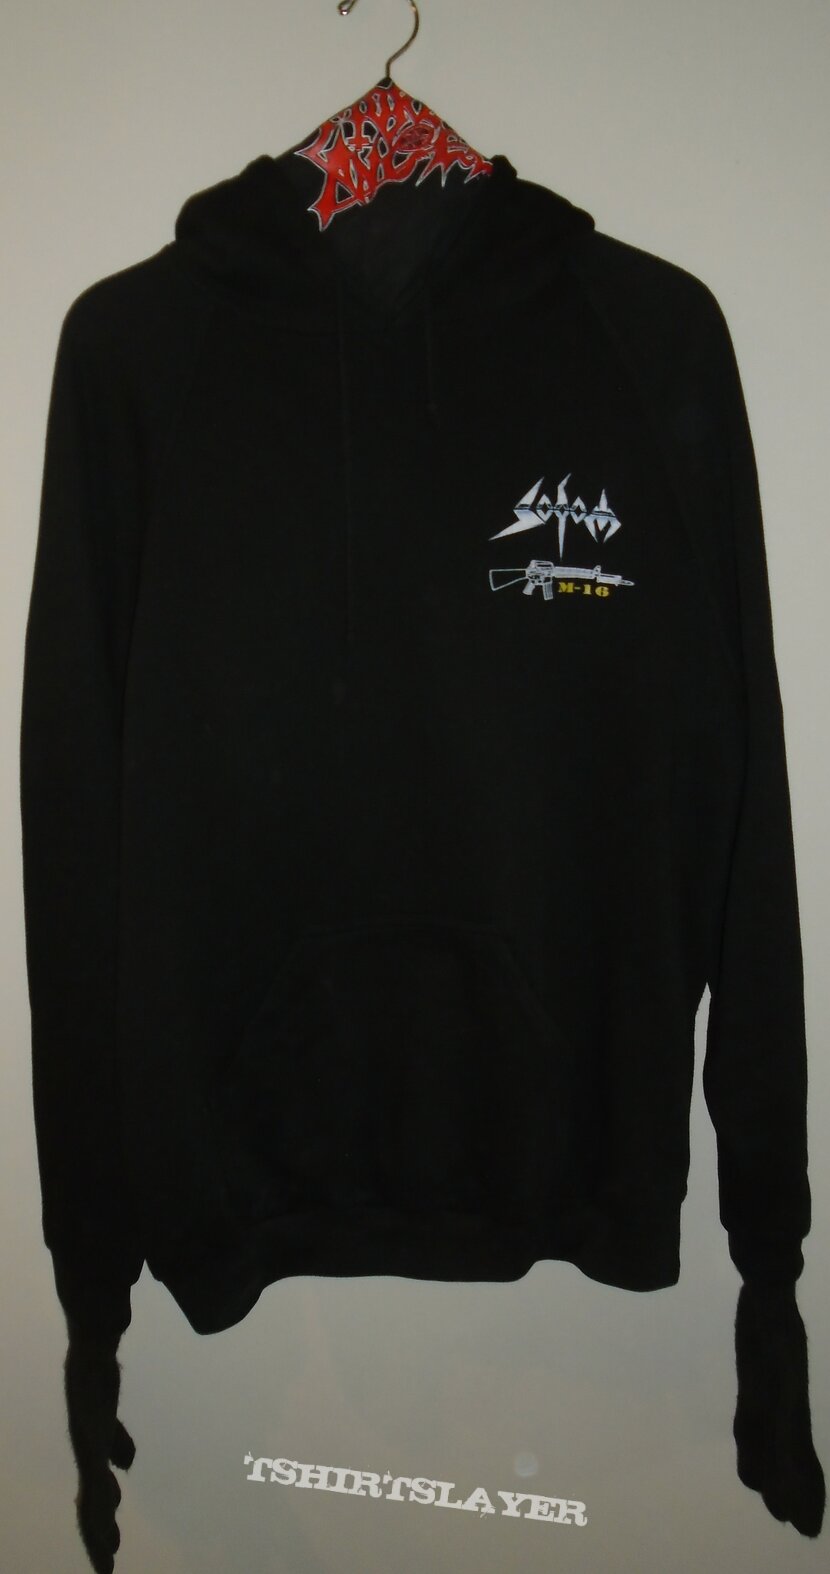 Sodom &#039;M-16&#039; Hoodie with Morbid Angel Face Cover